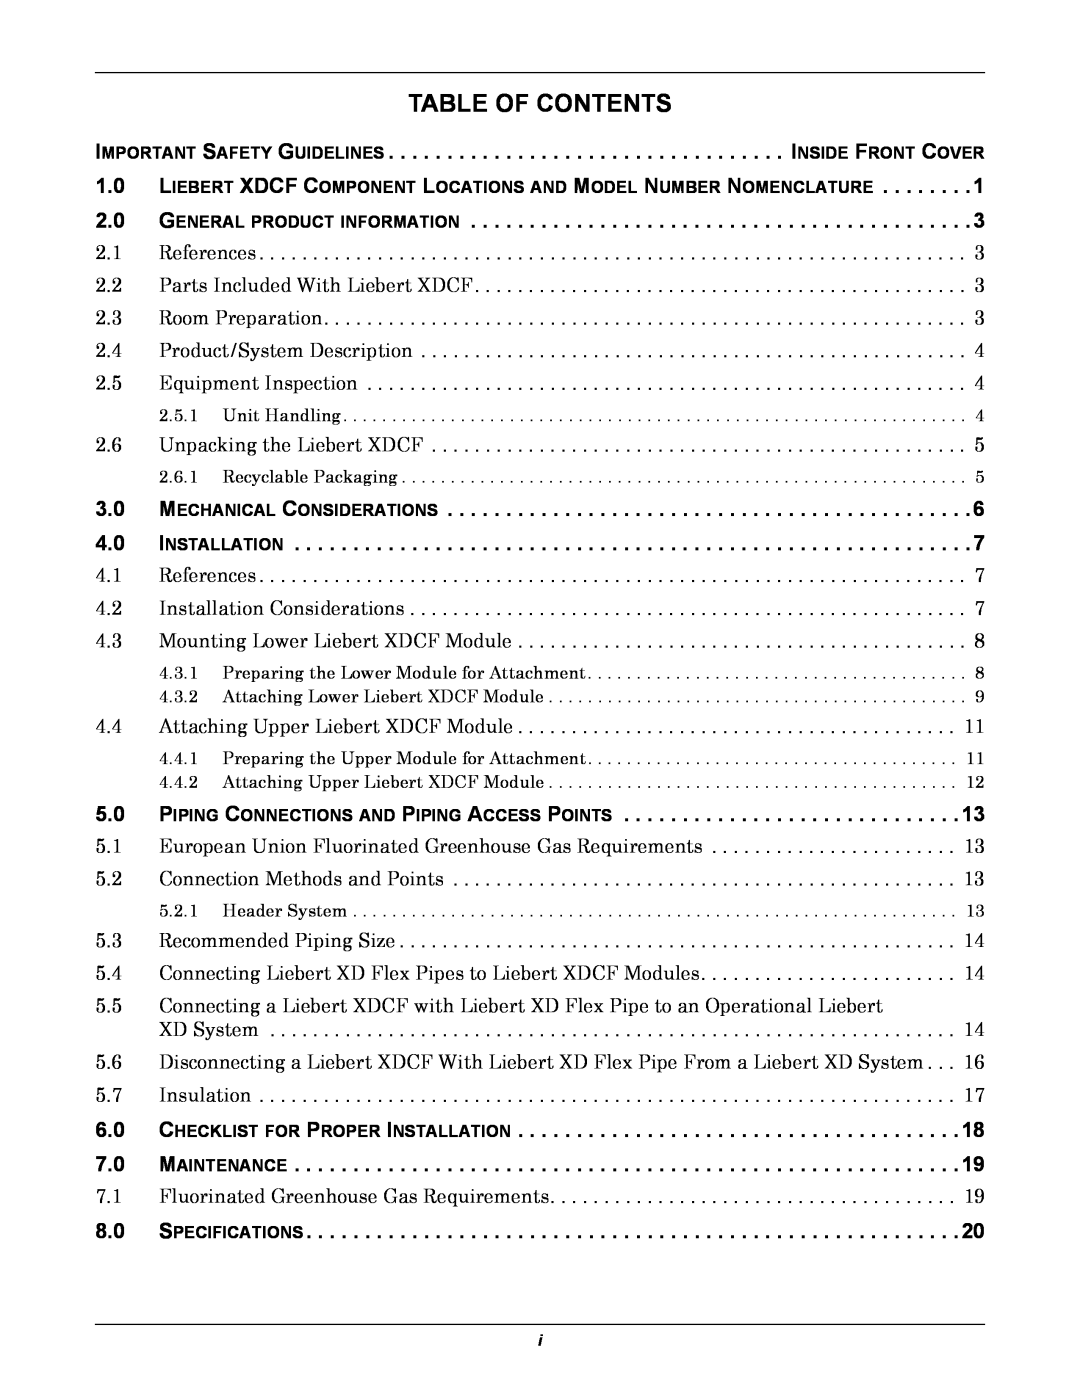 Emerson XDCF Table Of Contents, General Product Information, Piping Connections And Piping Access Points, Specifications 